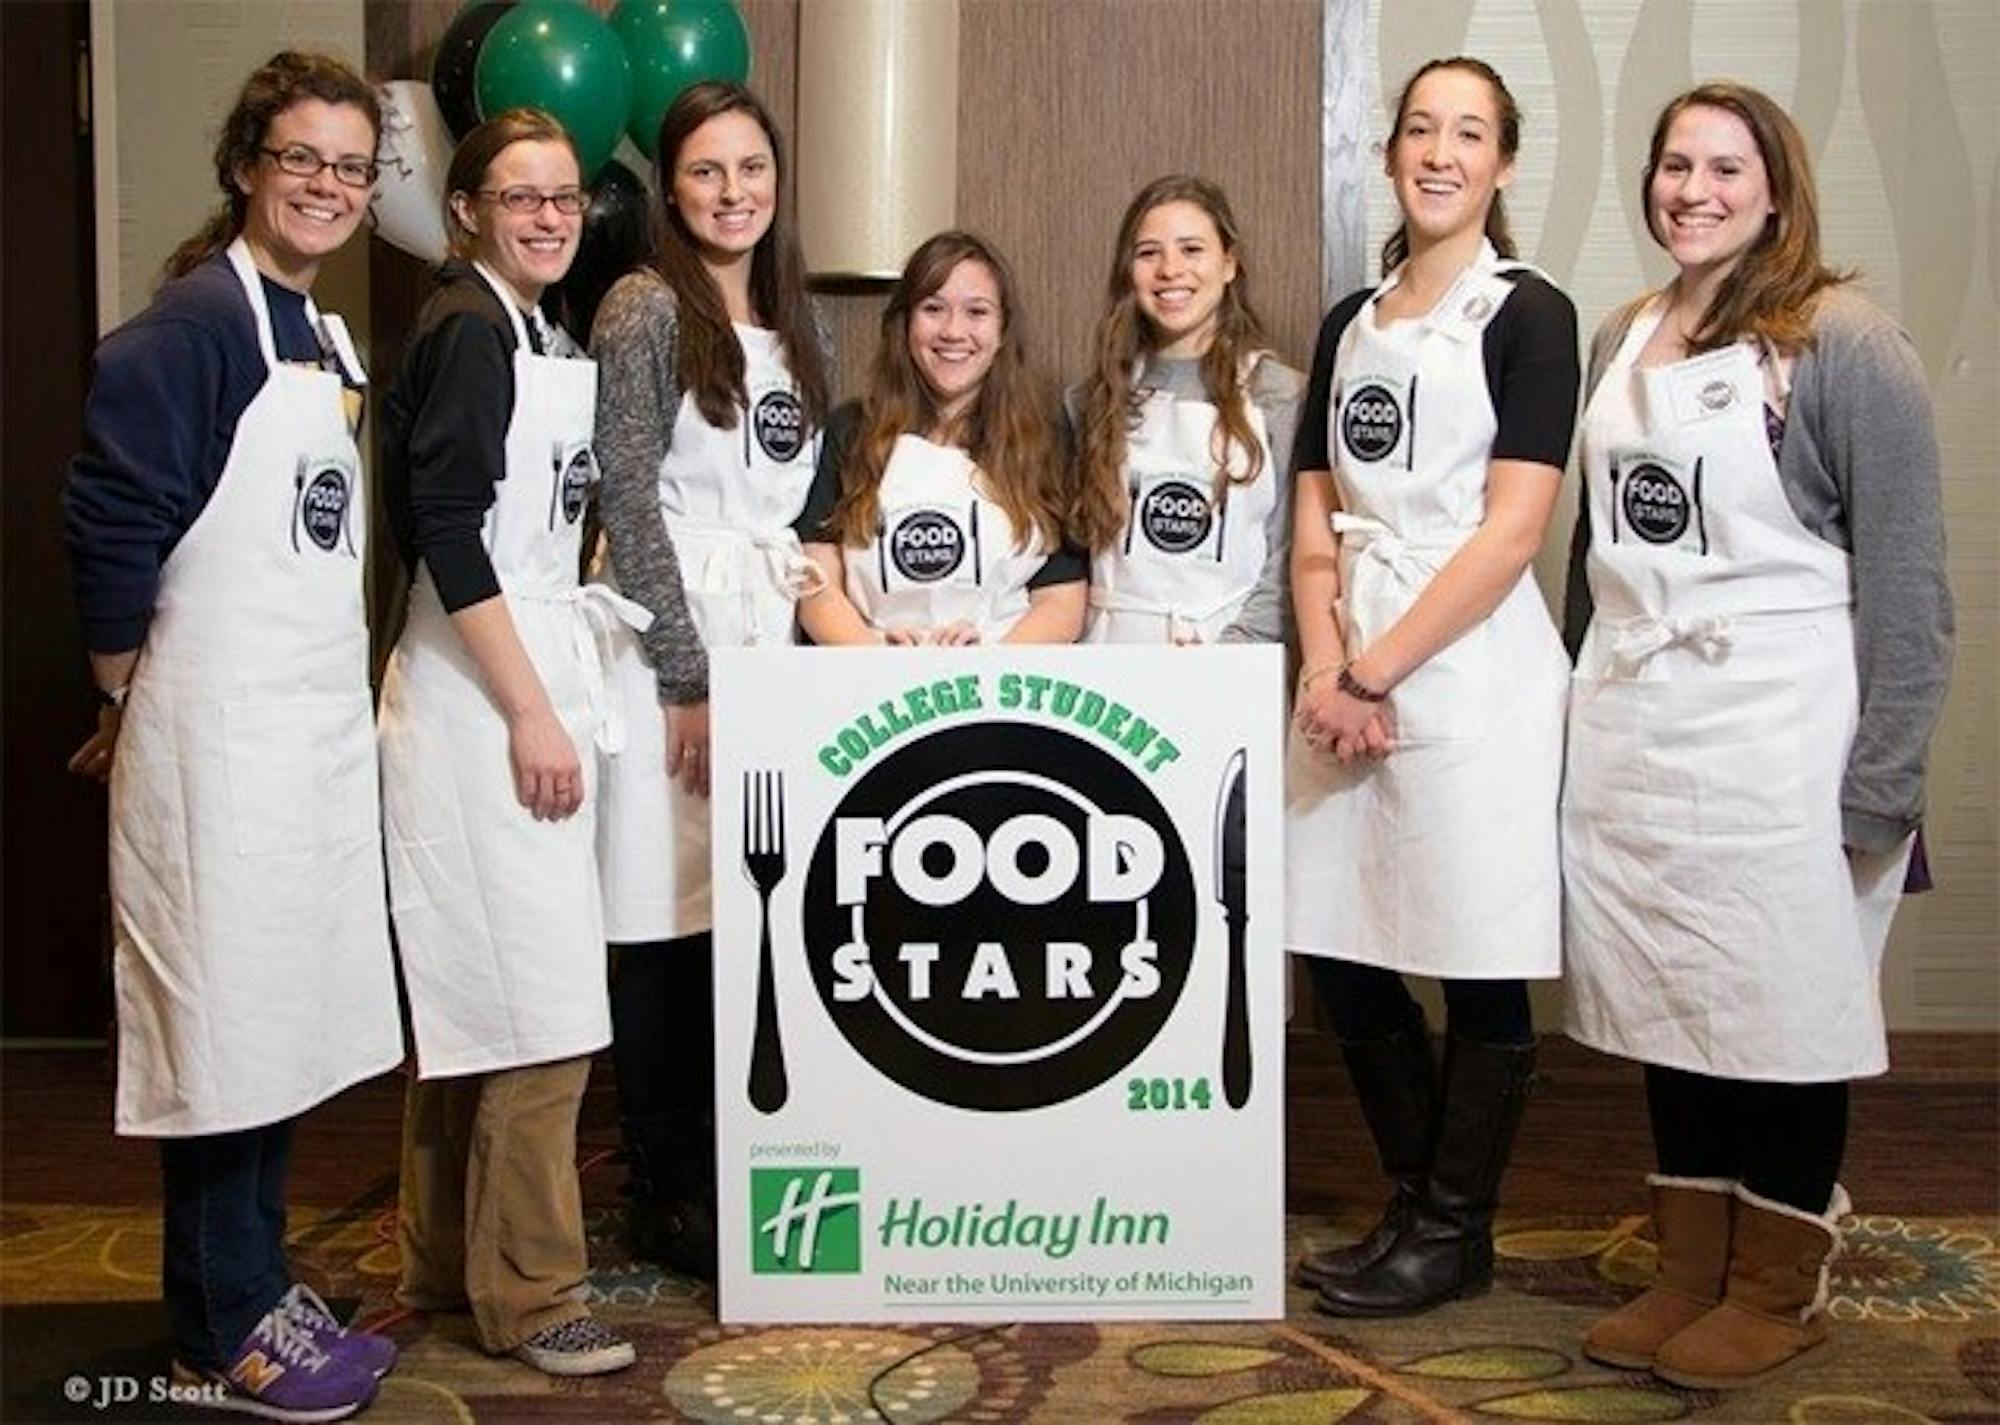 Photo provided by The Holiday Inn Ann Arbor, the 8 finalists of the College Student Food Stars competition